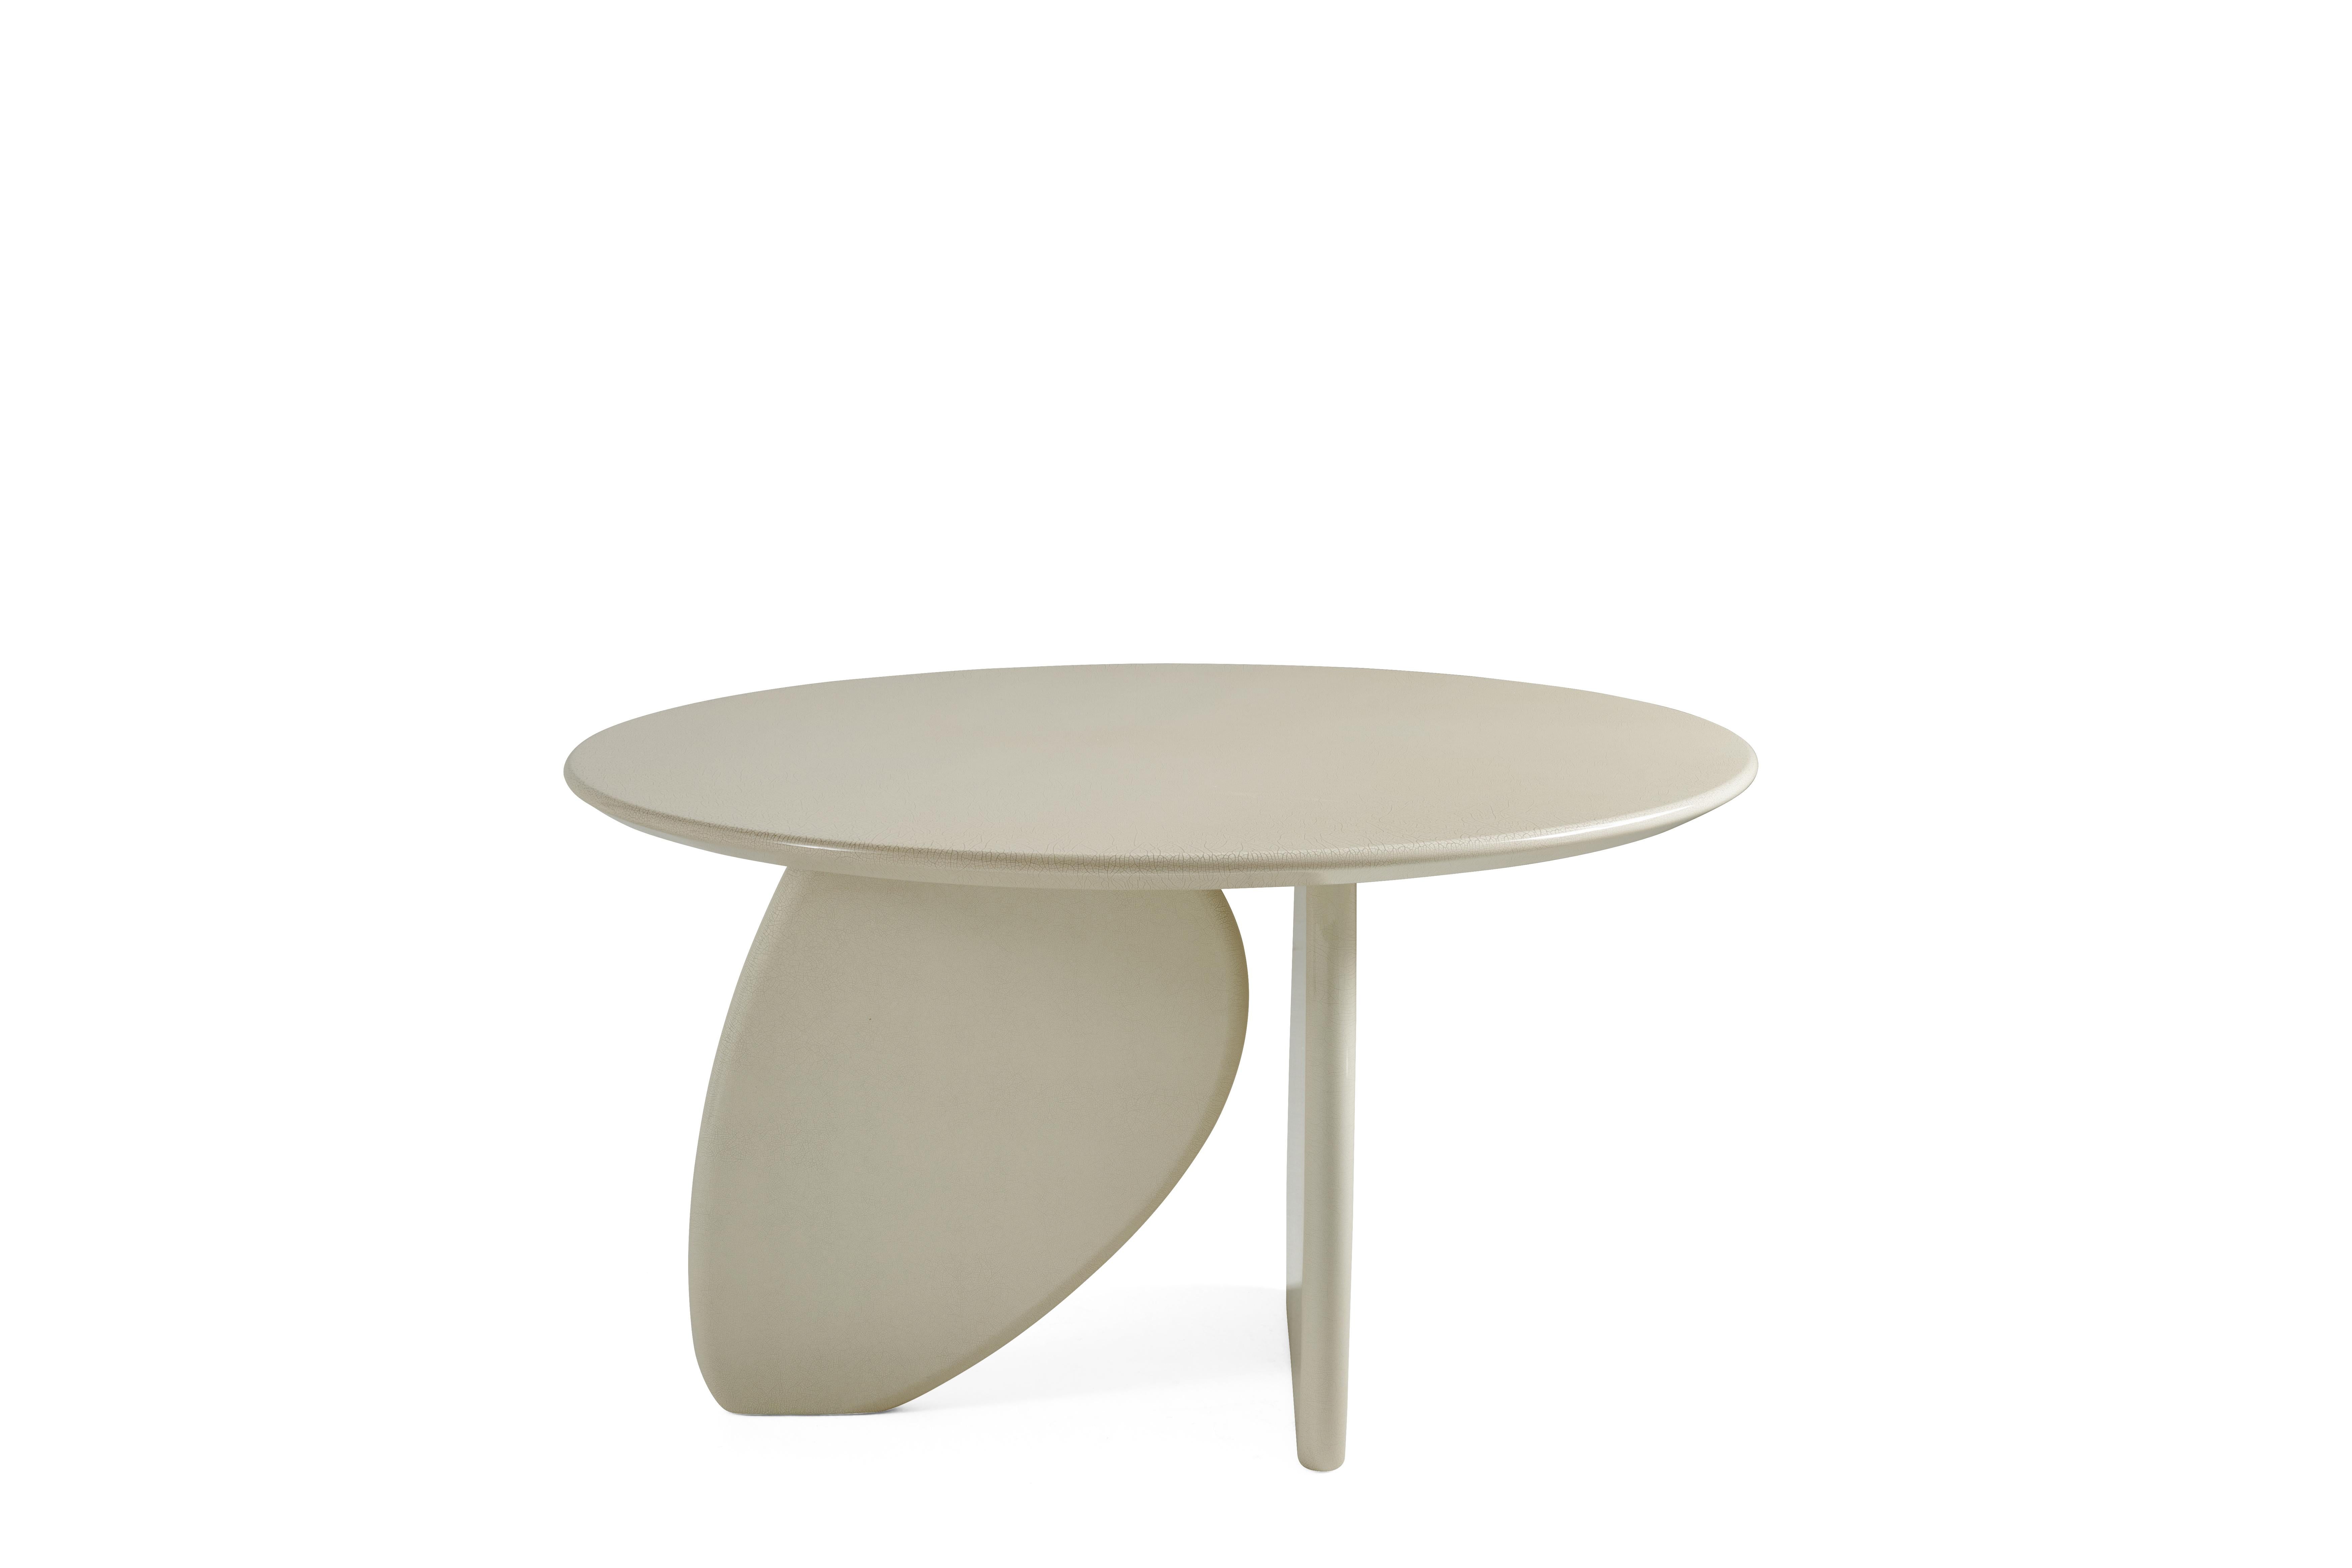 Modern Aldabra Table with Eggshell Finishing by Roberto Cavalli Home Interiors For Sale